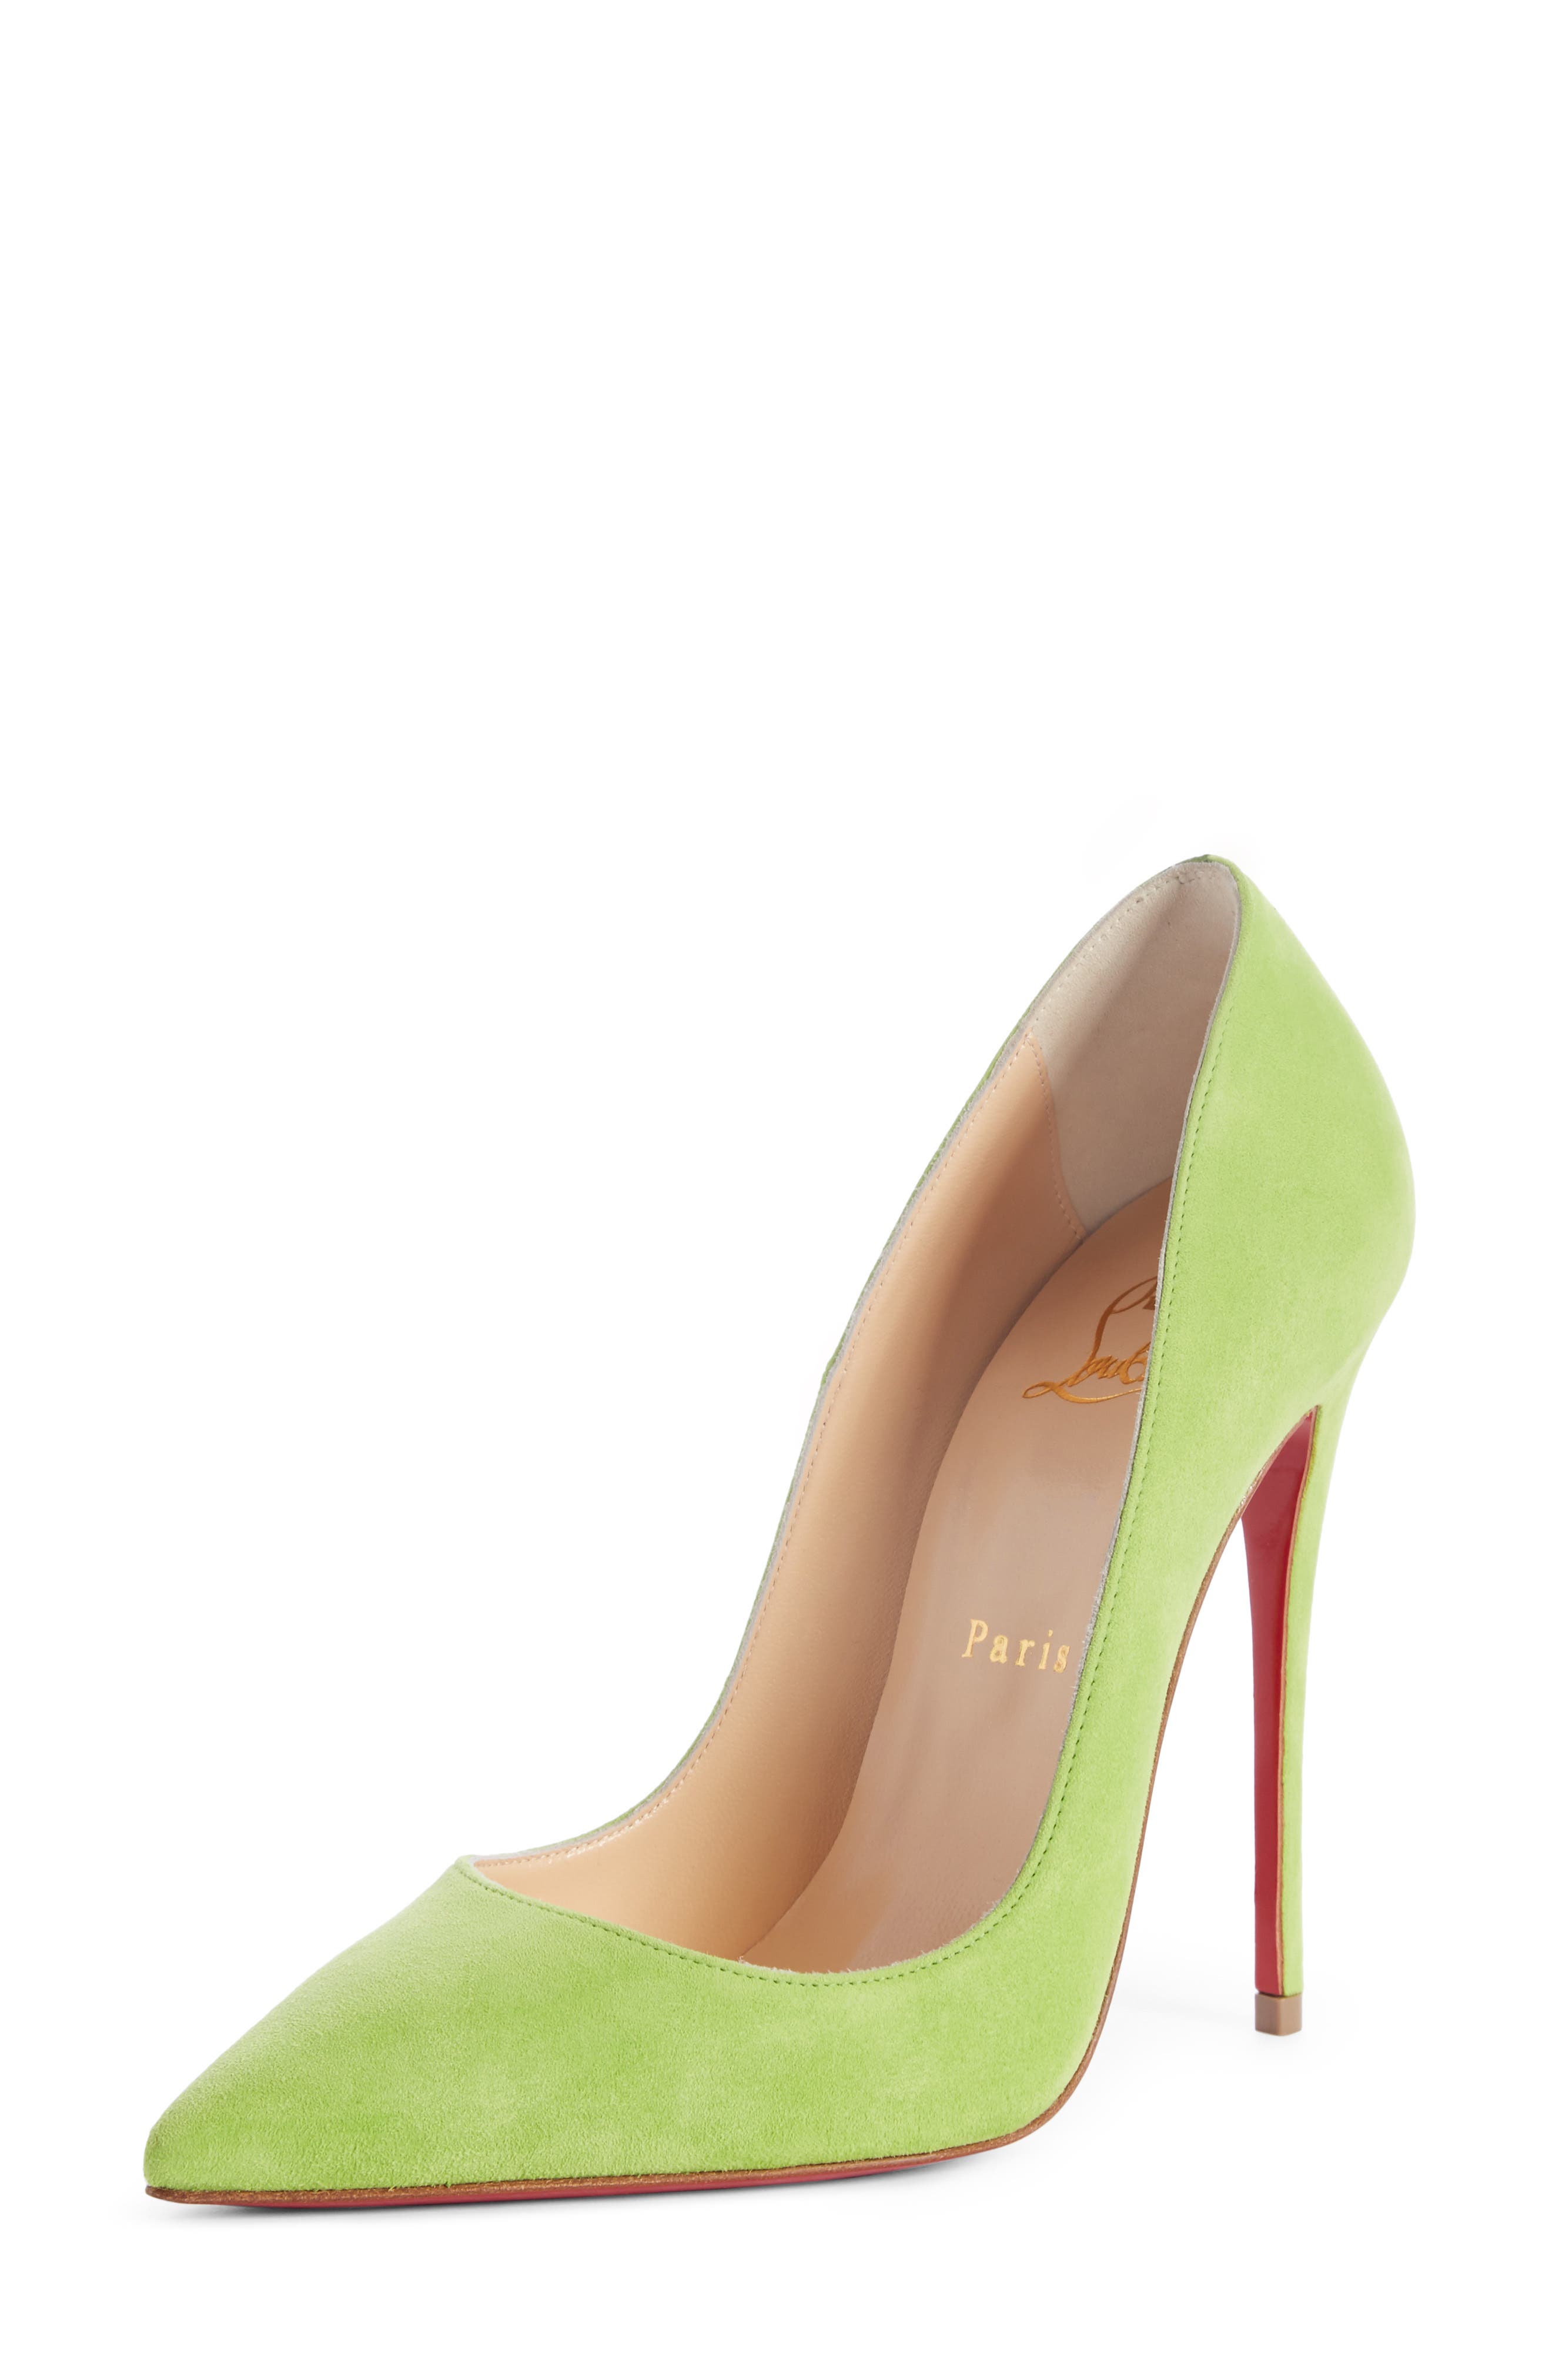 nordstrom rack christian louboutin shoes